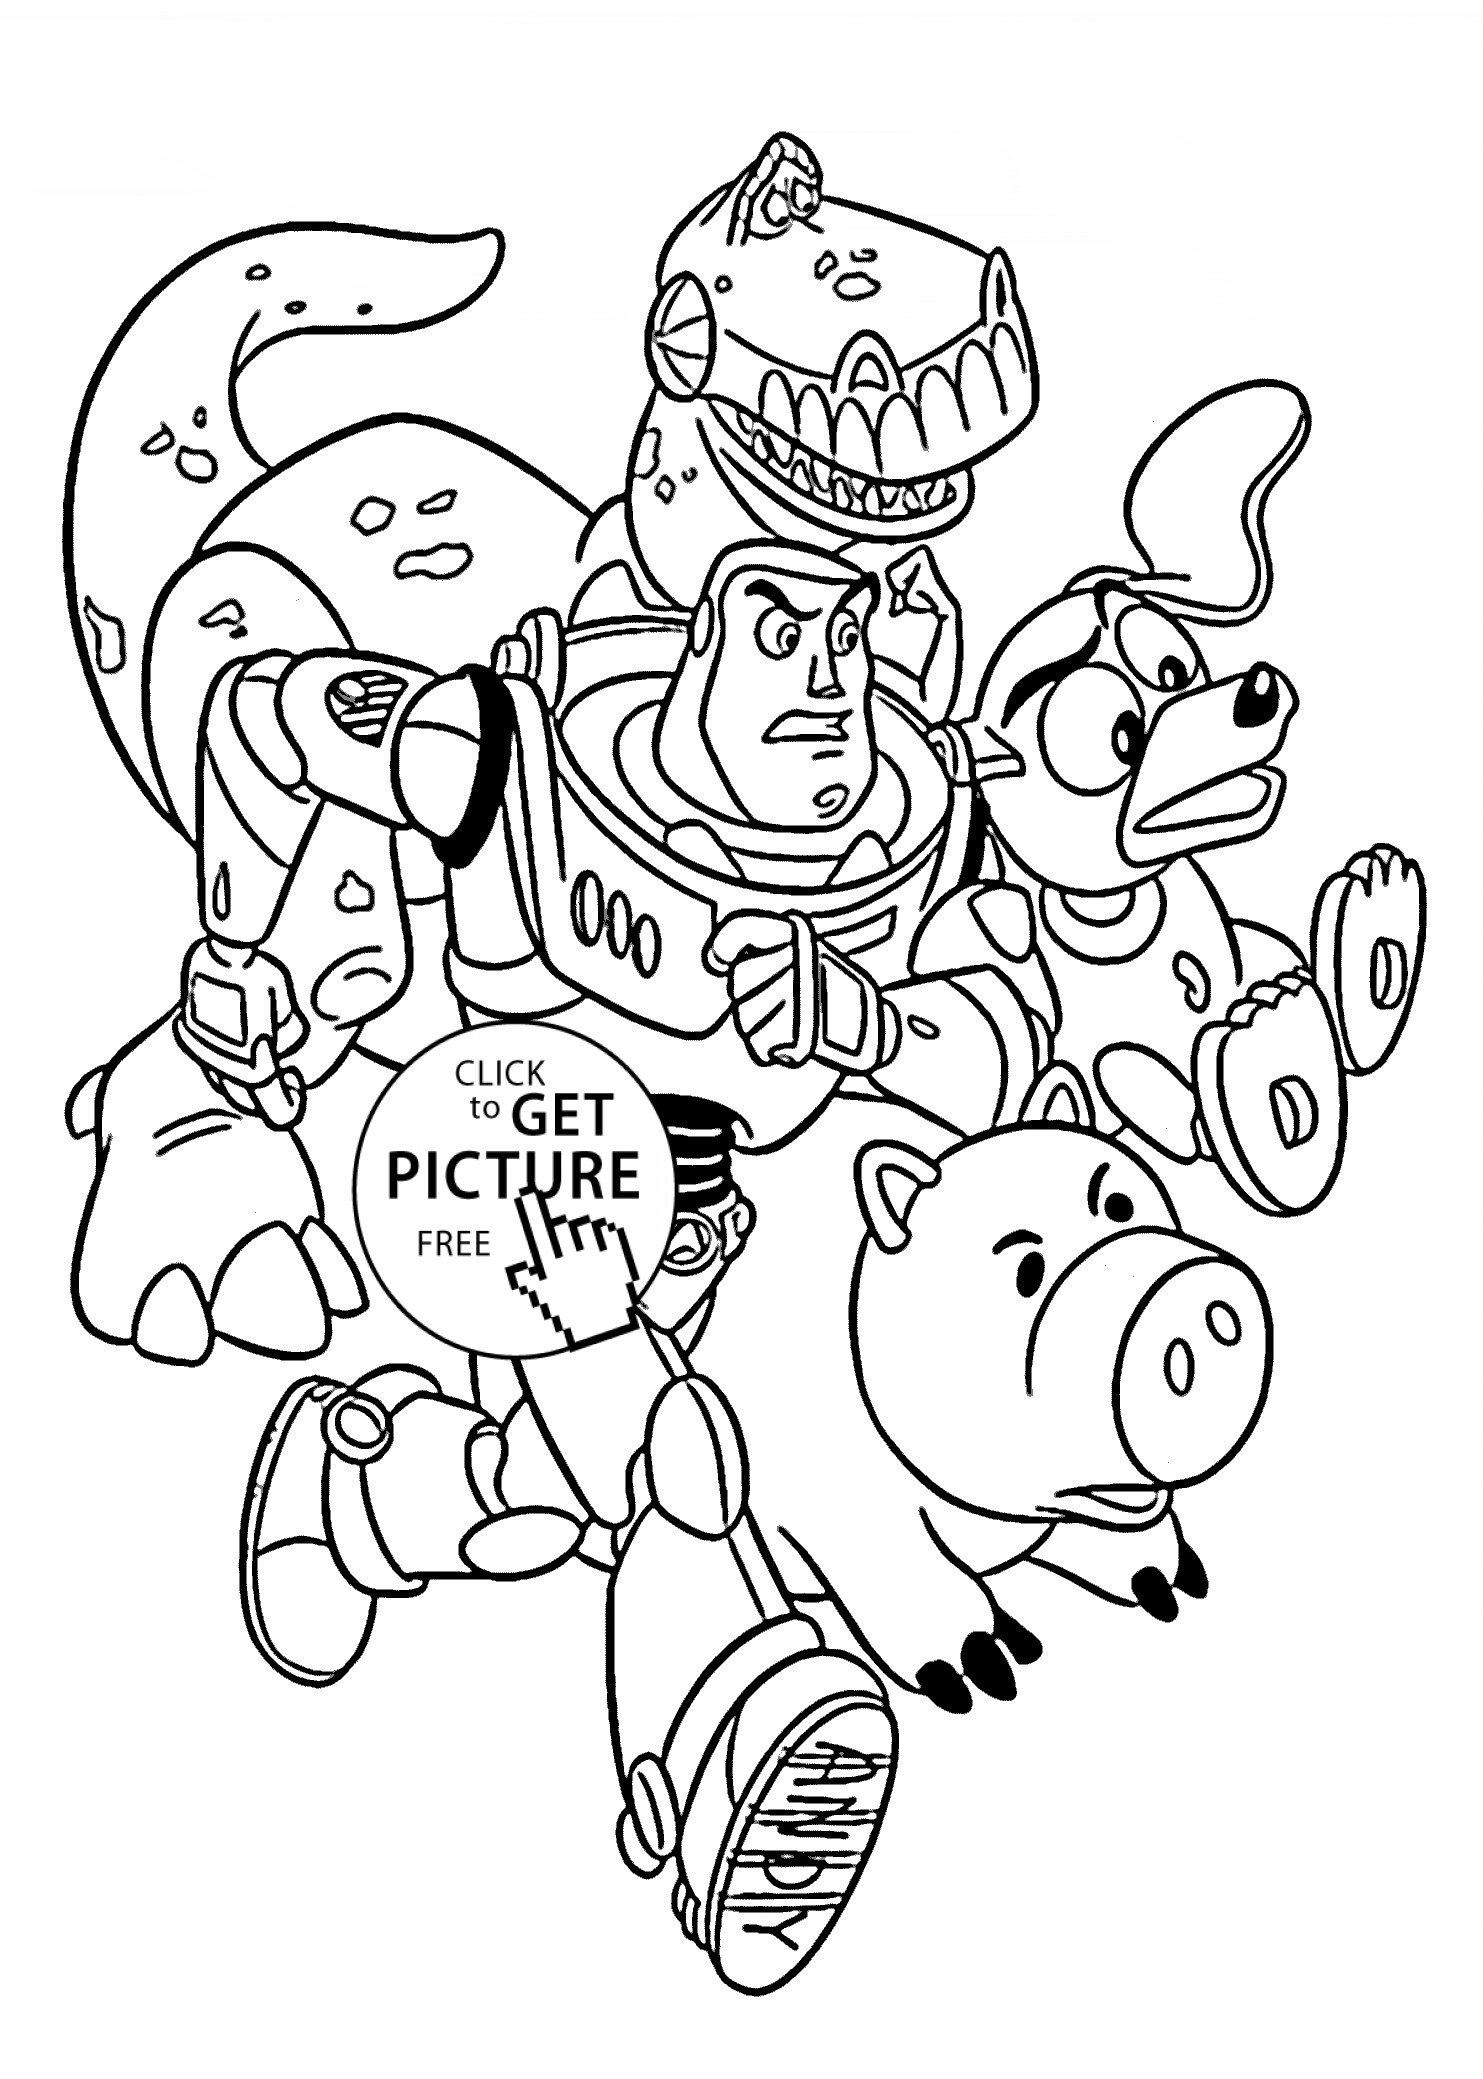 Kids Coloring Sheets
 Rescue from Toy story coloring pages for kids printable